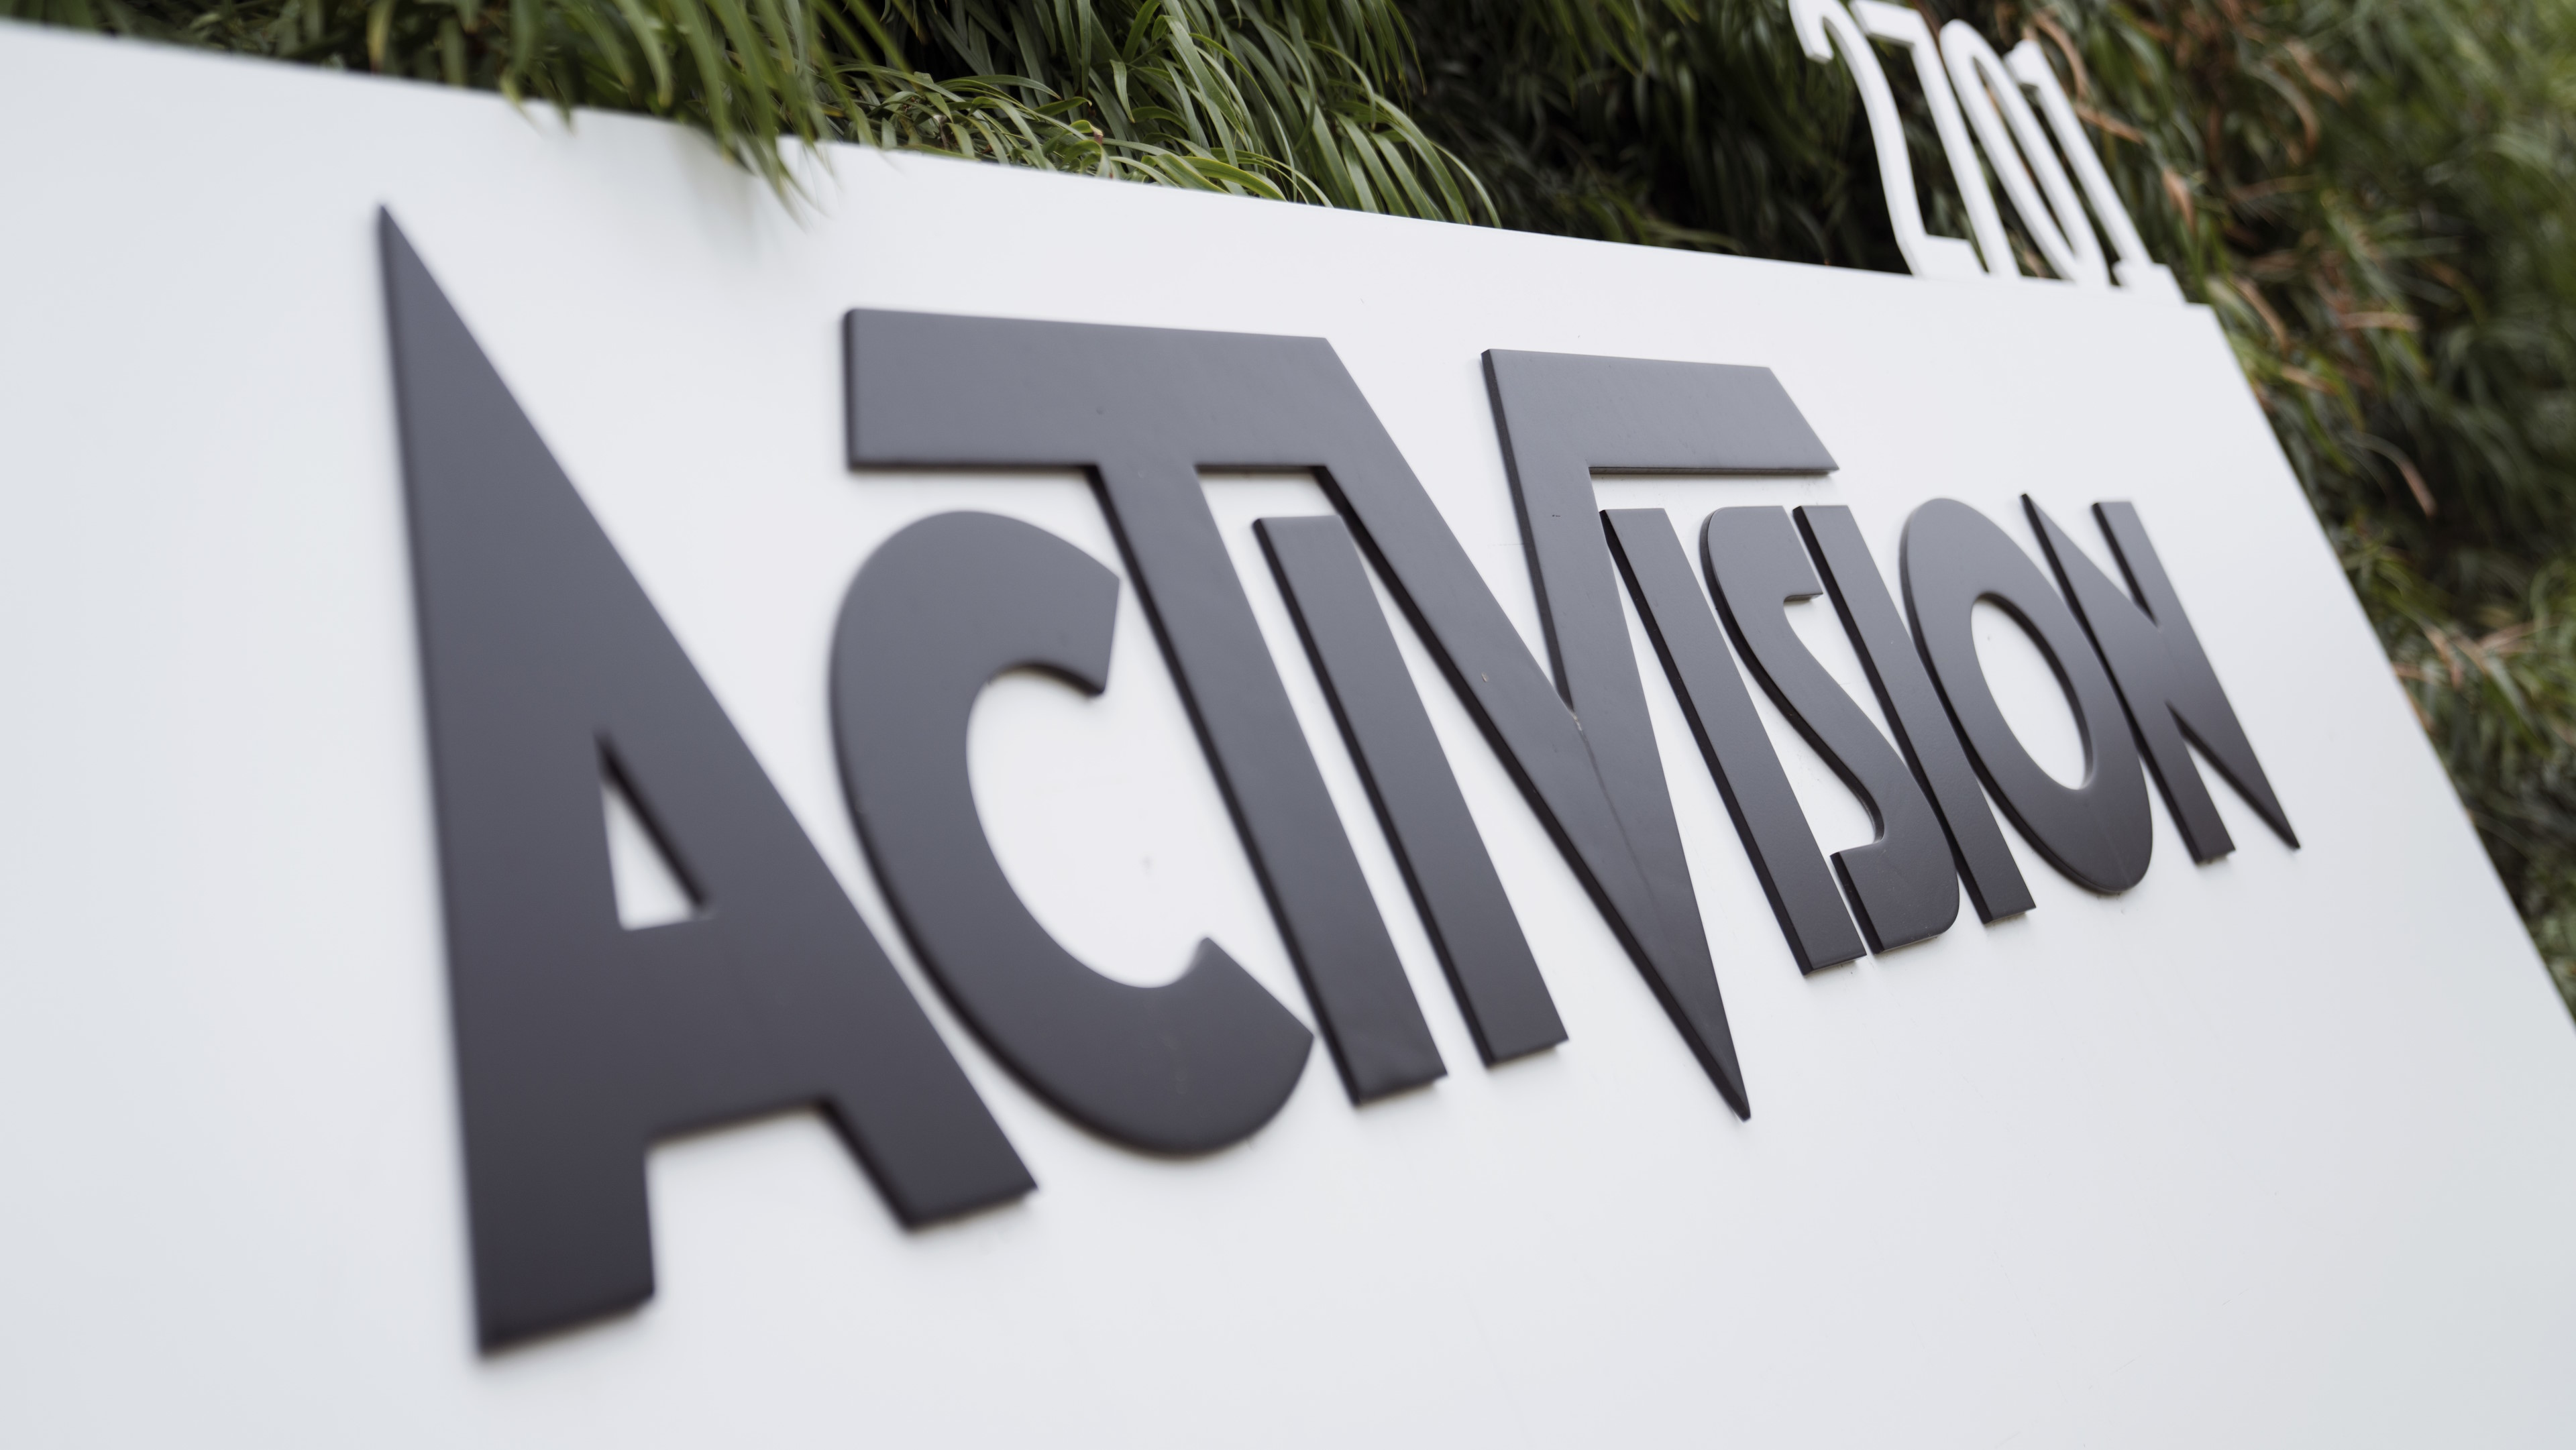  The gamer lawsuit against Microsoft - Activision deal suffers another blow 